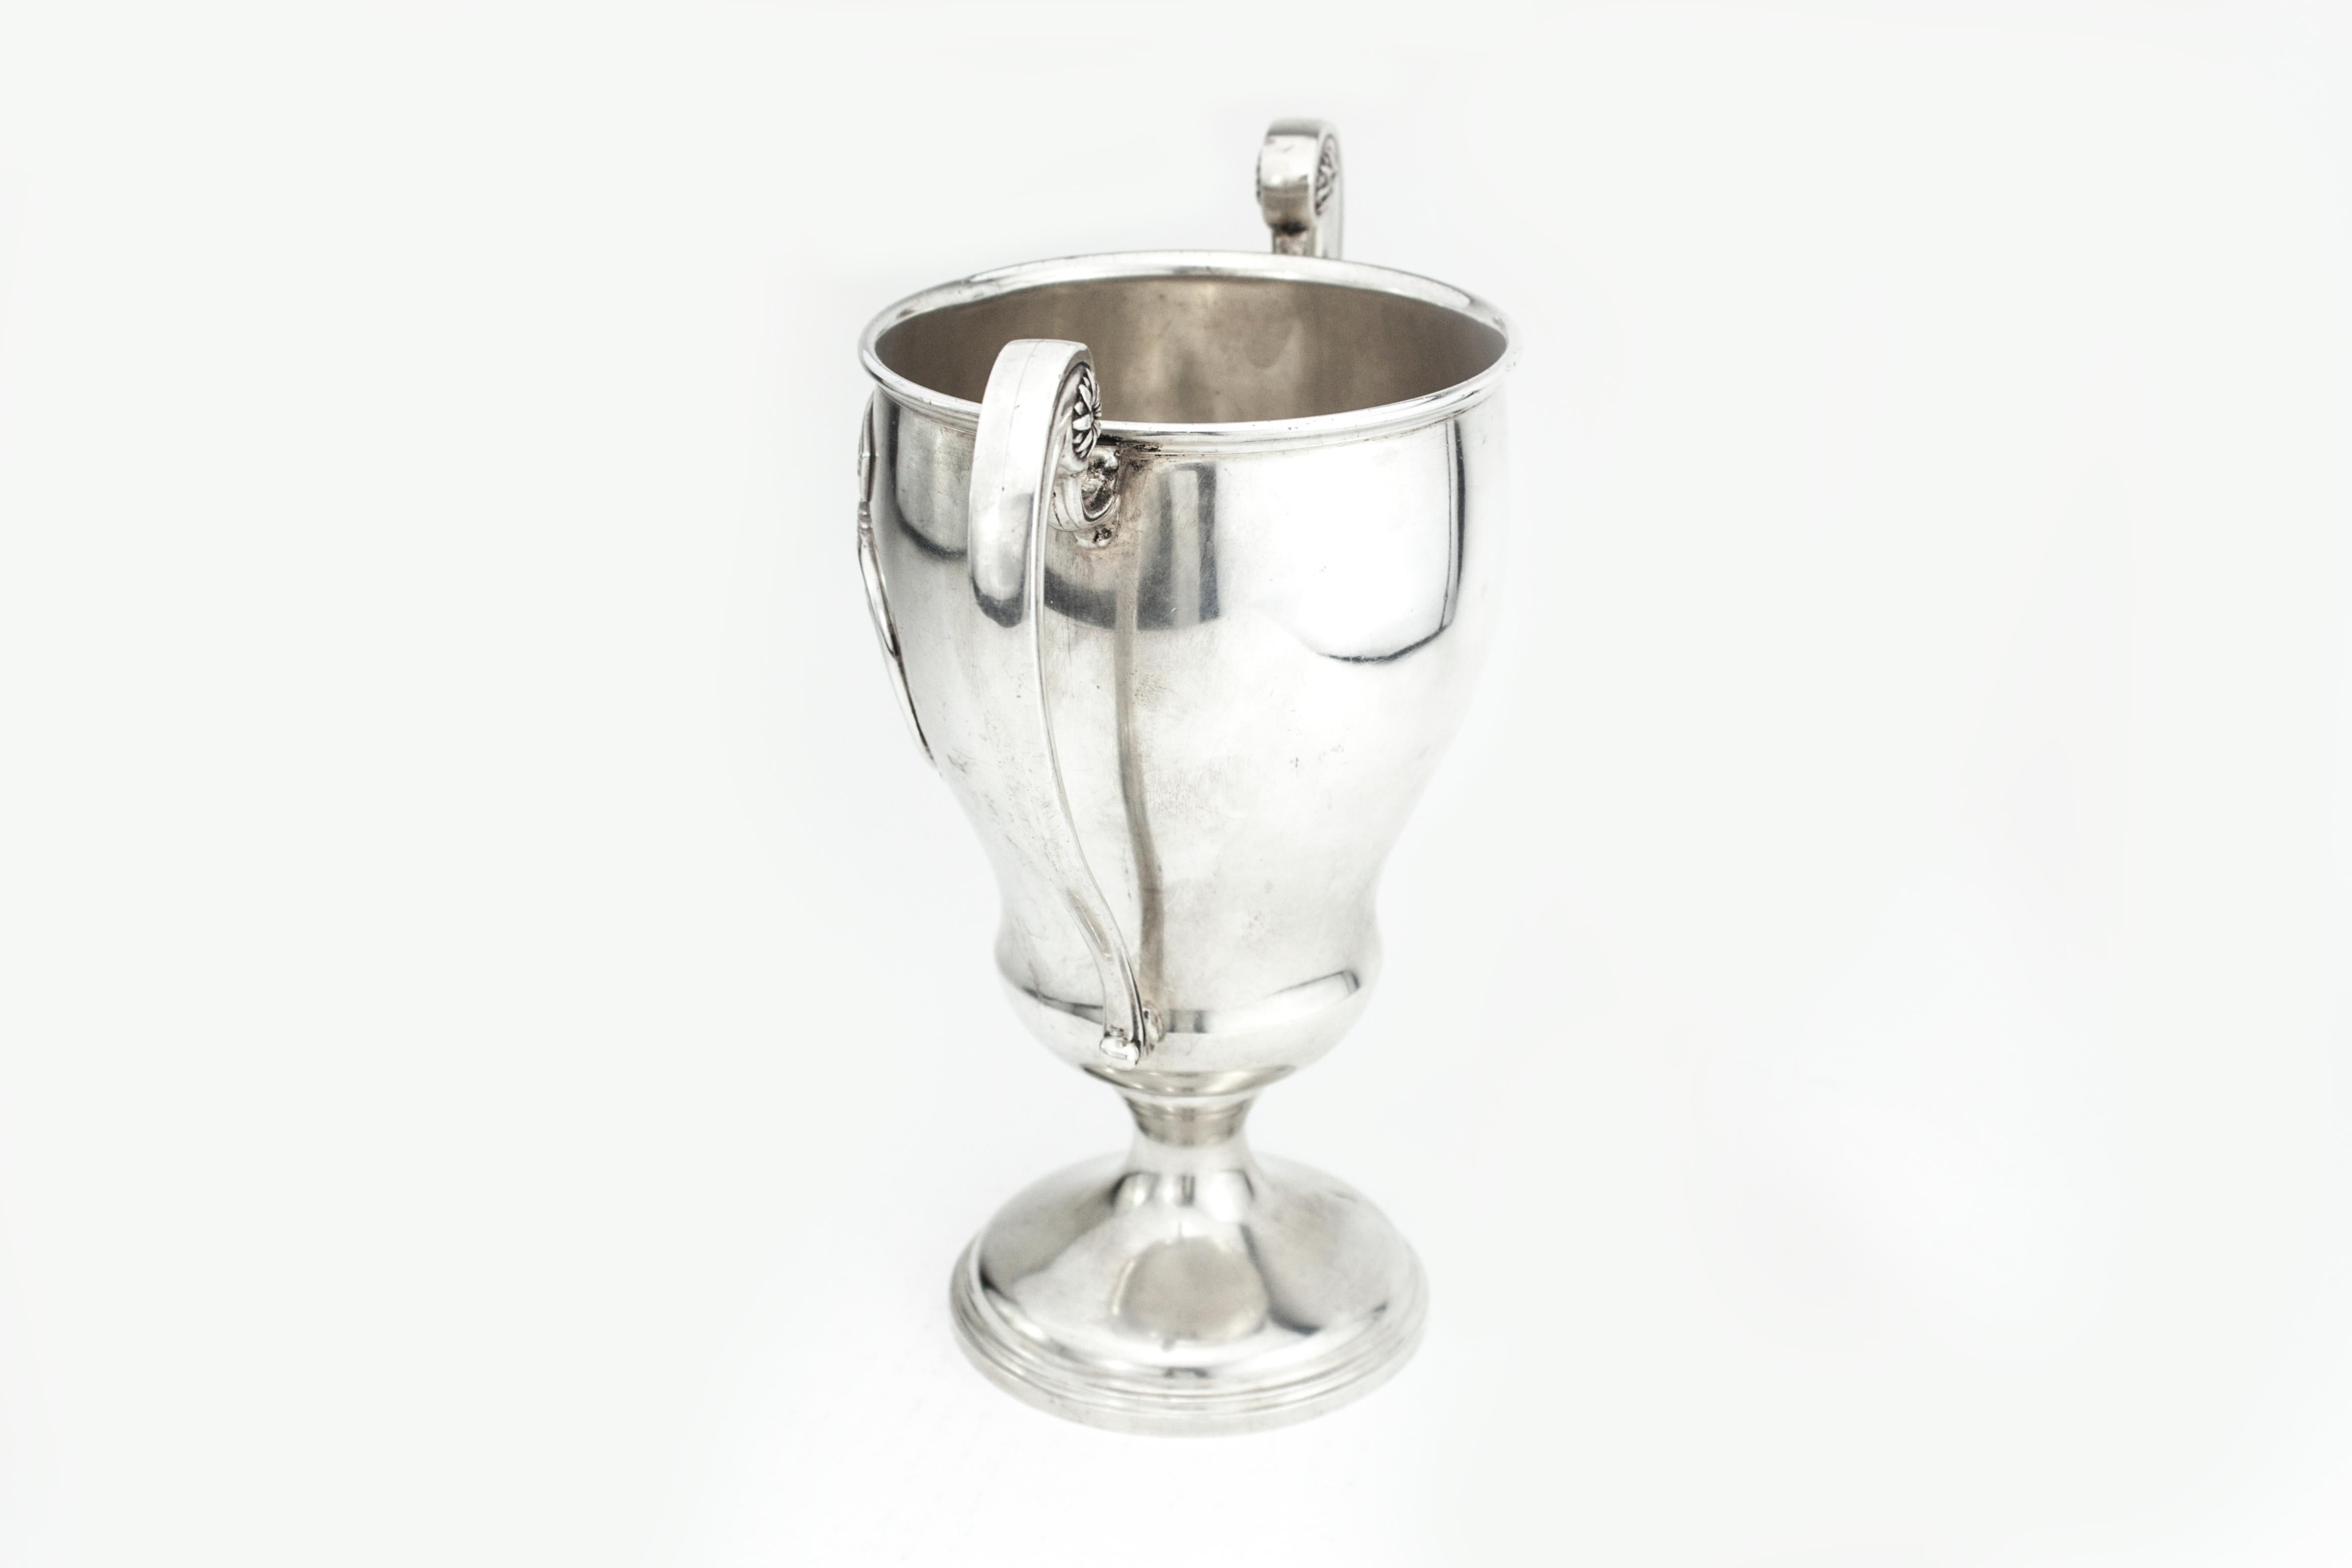 Antique sterling silver HOVIS Ltd. trophy 
Maker: Bravingtons Ltd.
Made in London, 1931
Fully hallmarked.

Dimensions - 
Length 19.5 cm 
Width 10.5 cm
Height 20 cm
Weight: 504 grams

Condition: Minor wear from general usage, age-related